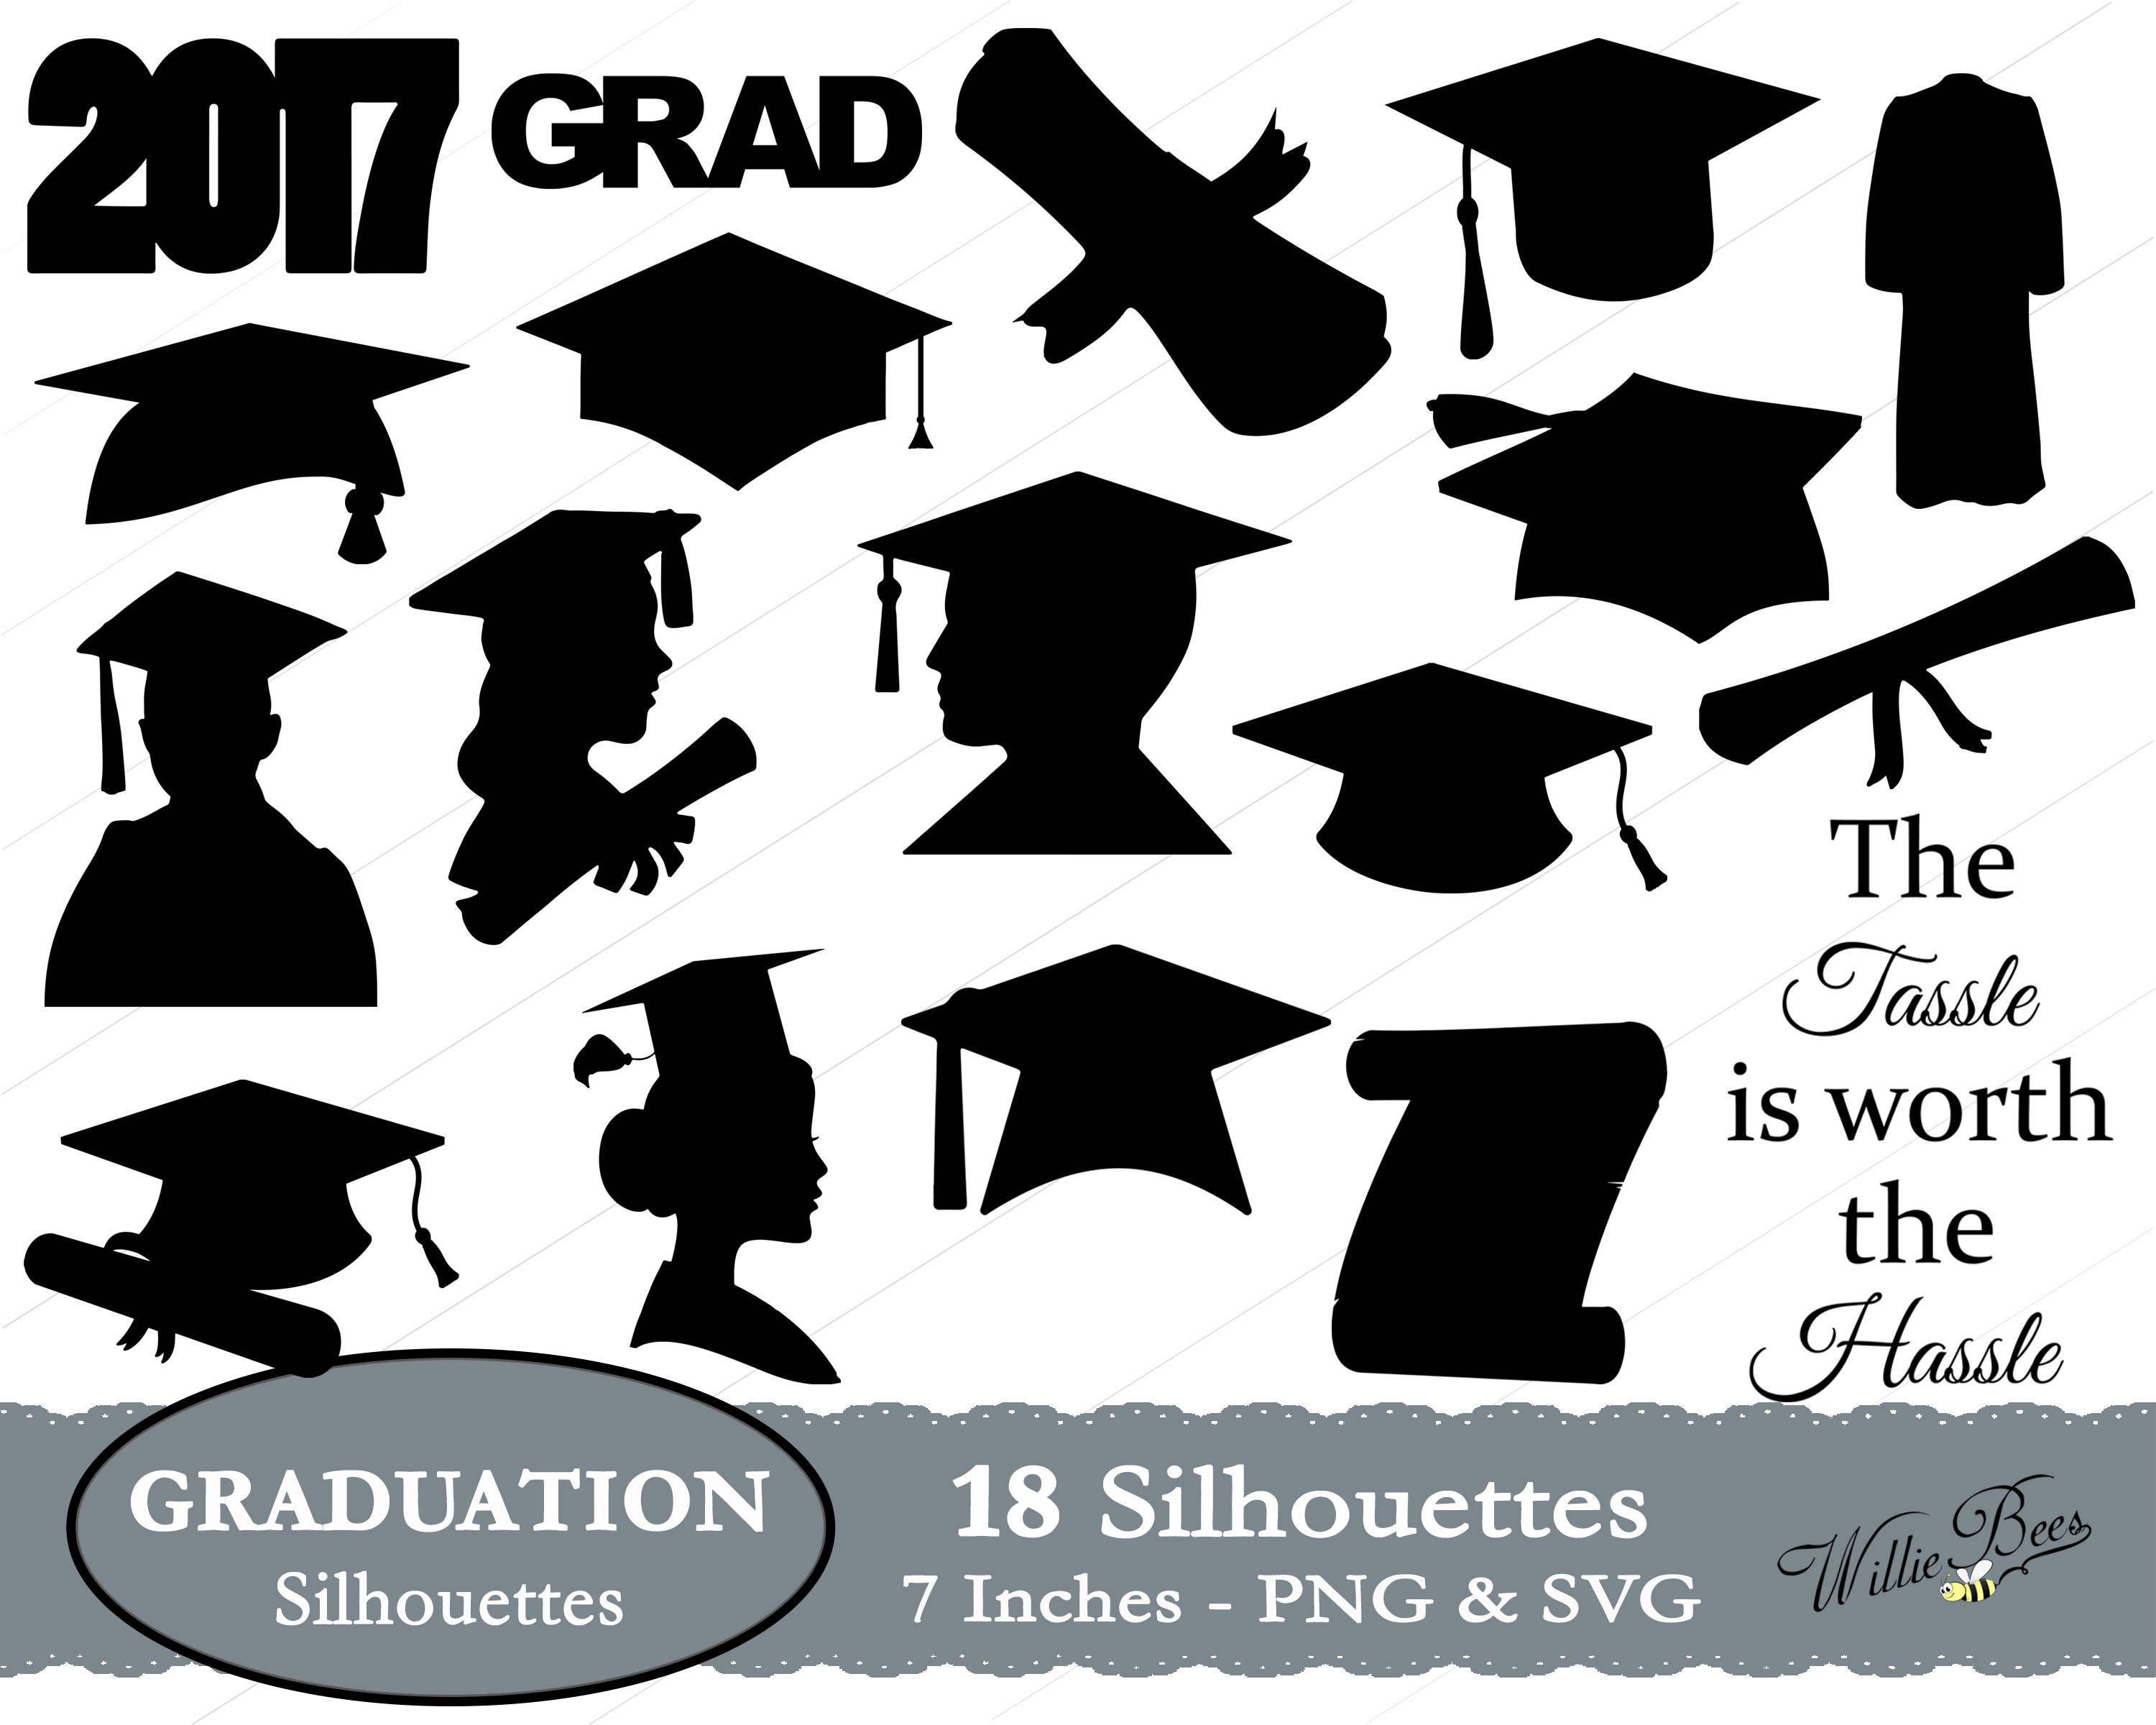 Download Graduation Silhouette Clip Art 7 inches PNG & SVG files